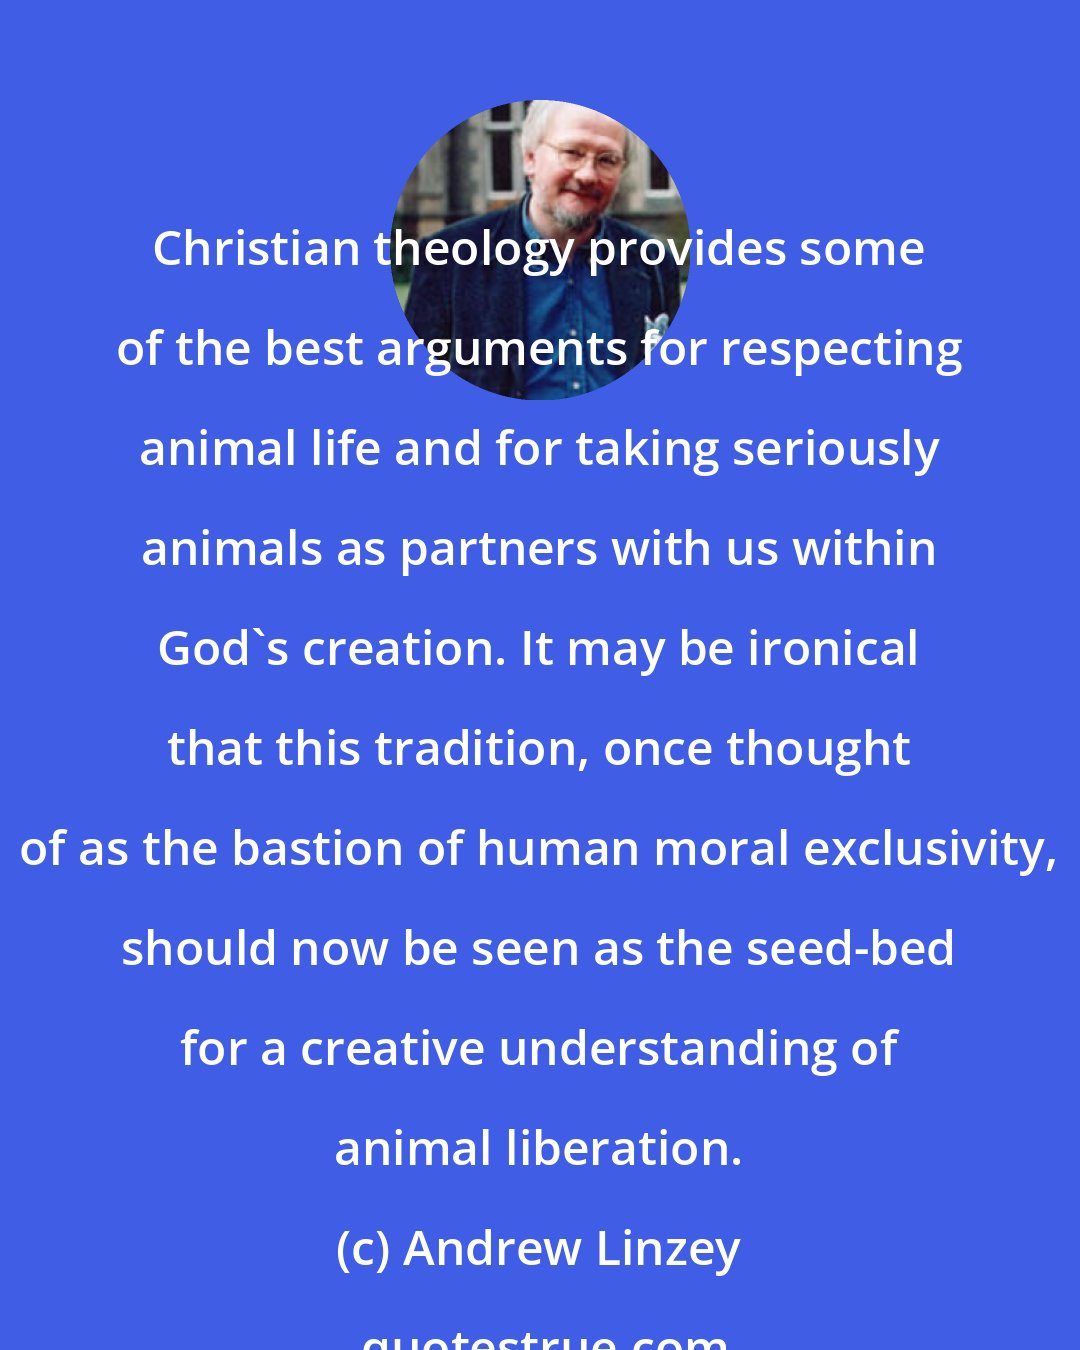 Andrew Linzey: Christian theology provides some of the best arguments for respecting animal life and for taking seriously animals as partners with us within God's creation. It may be ironical that this tradition, once thought of as the bastion of human moral exclusivity, should now be seen as the seed-bed for a creative understanding of animal liberation.